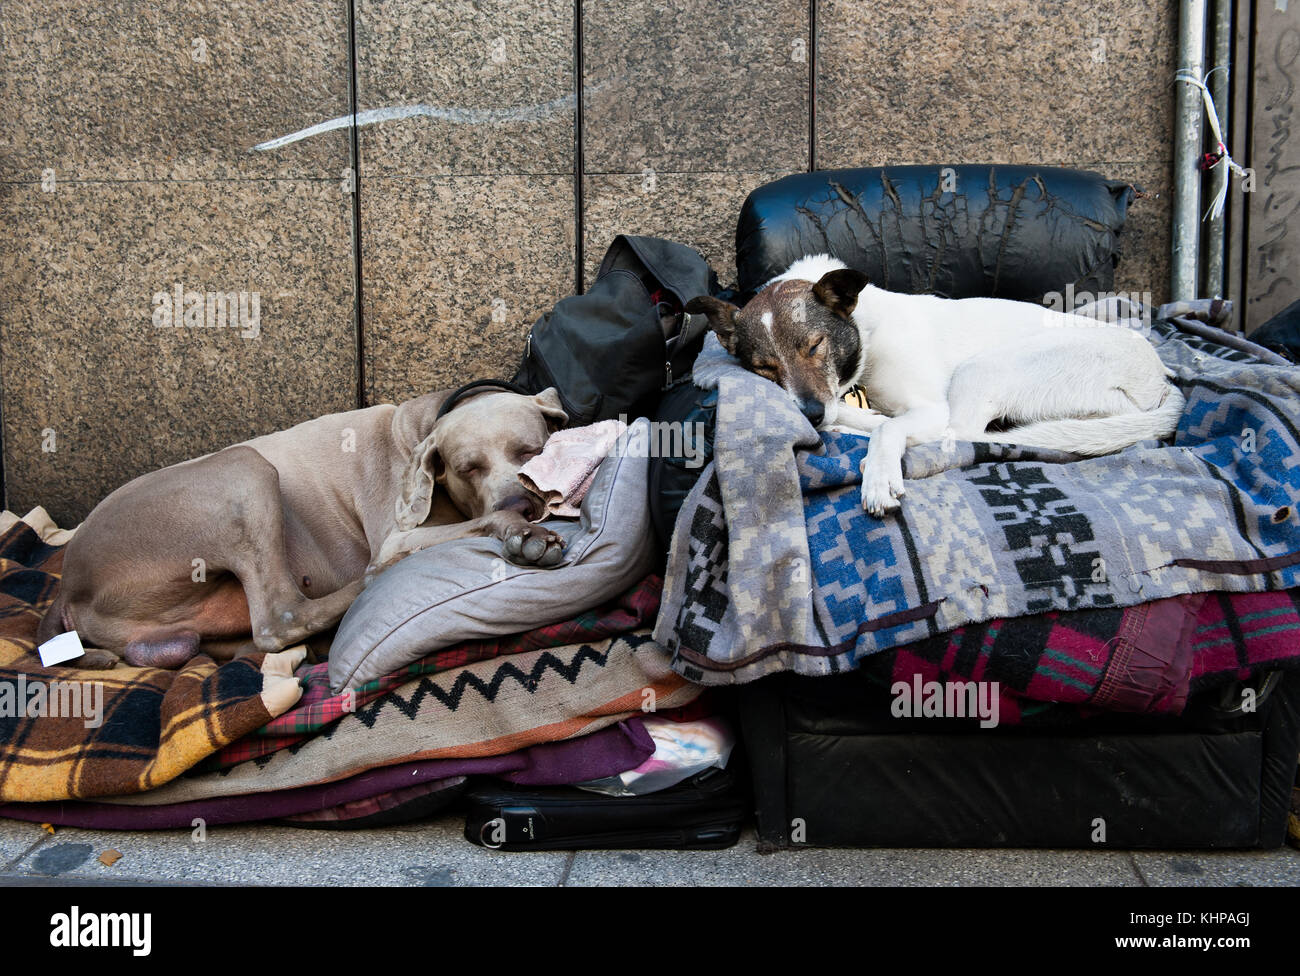 Two street dogs sleep comfortably on dismissed blankets in the street of Buenos Aires Stock Photo